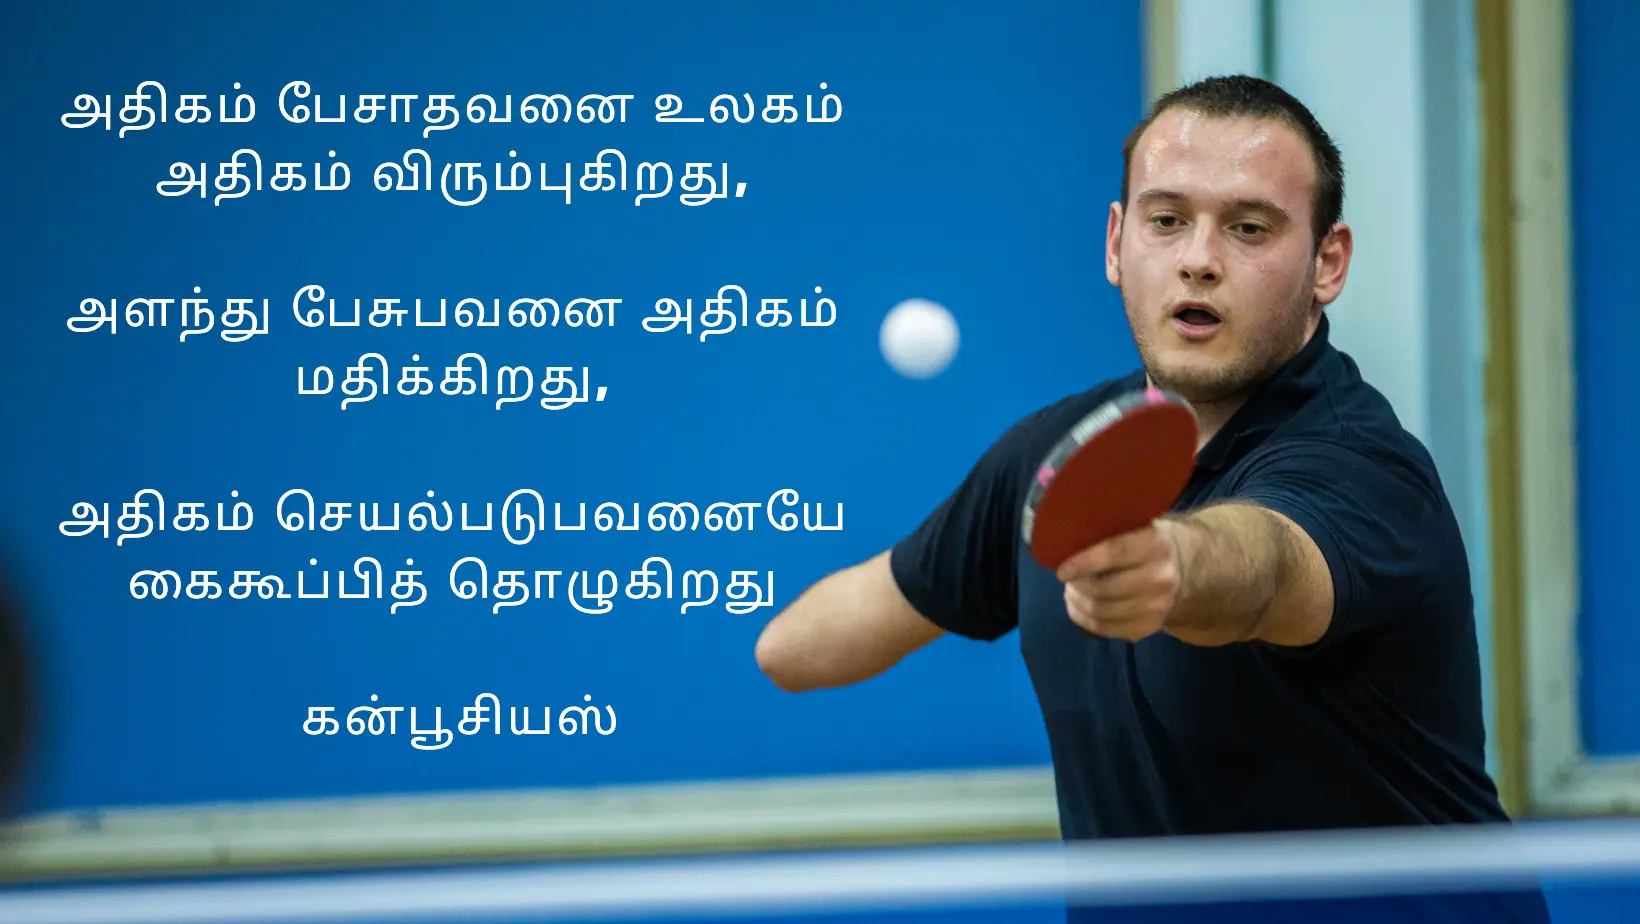 Motivational-Quotes-in-Tamil-Part6